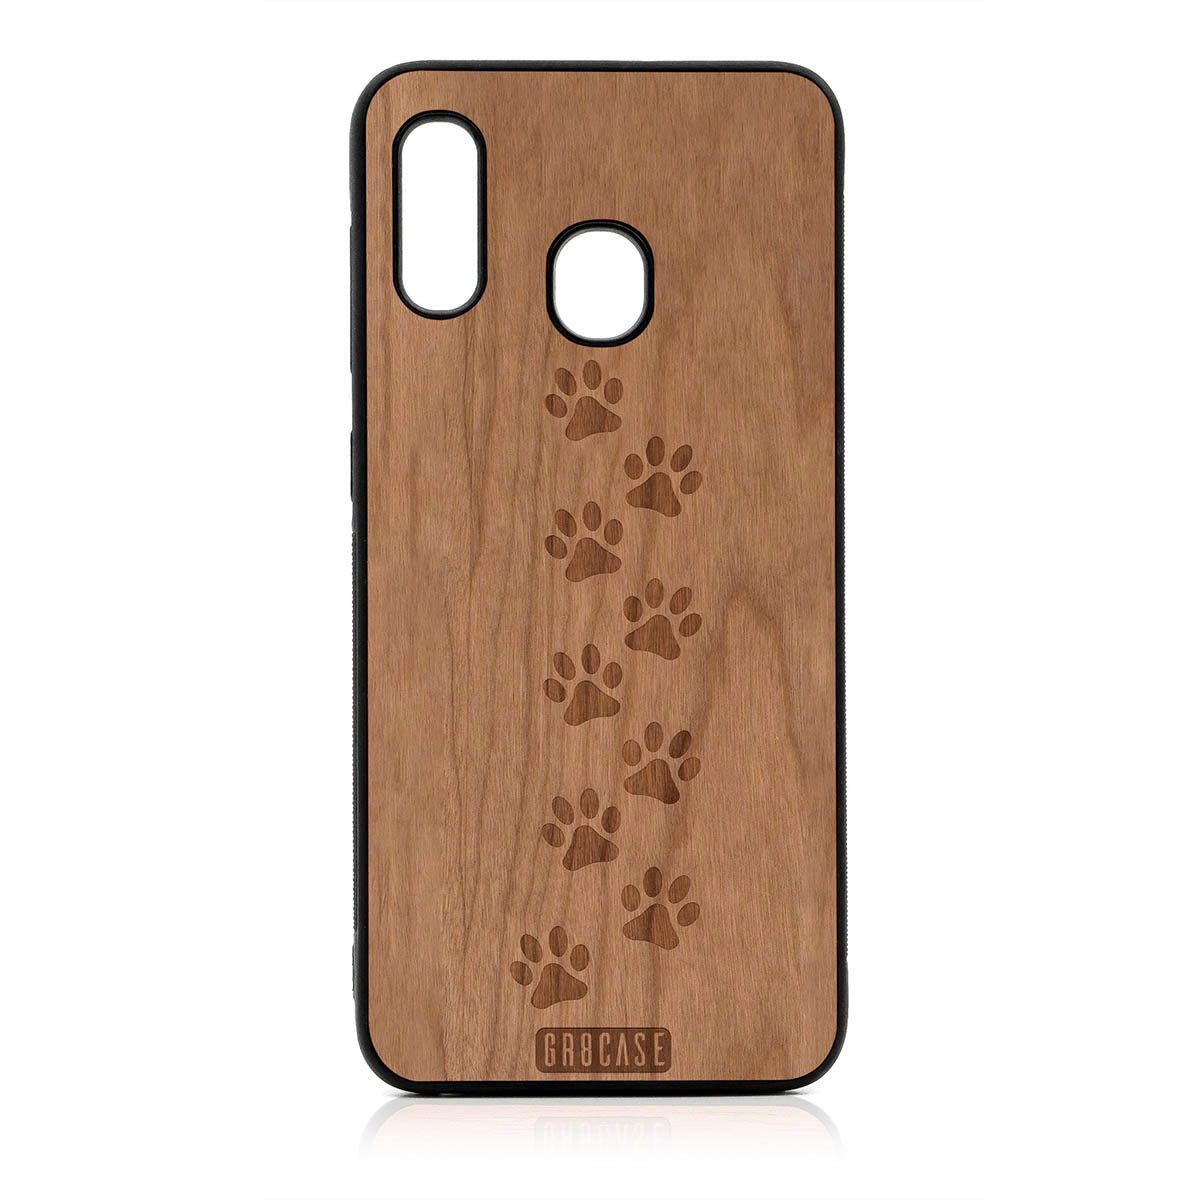 Paw Prints Design Wood Case For Samsung Galaxy A20 by GR8CASE